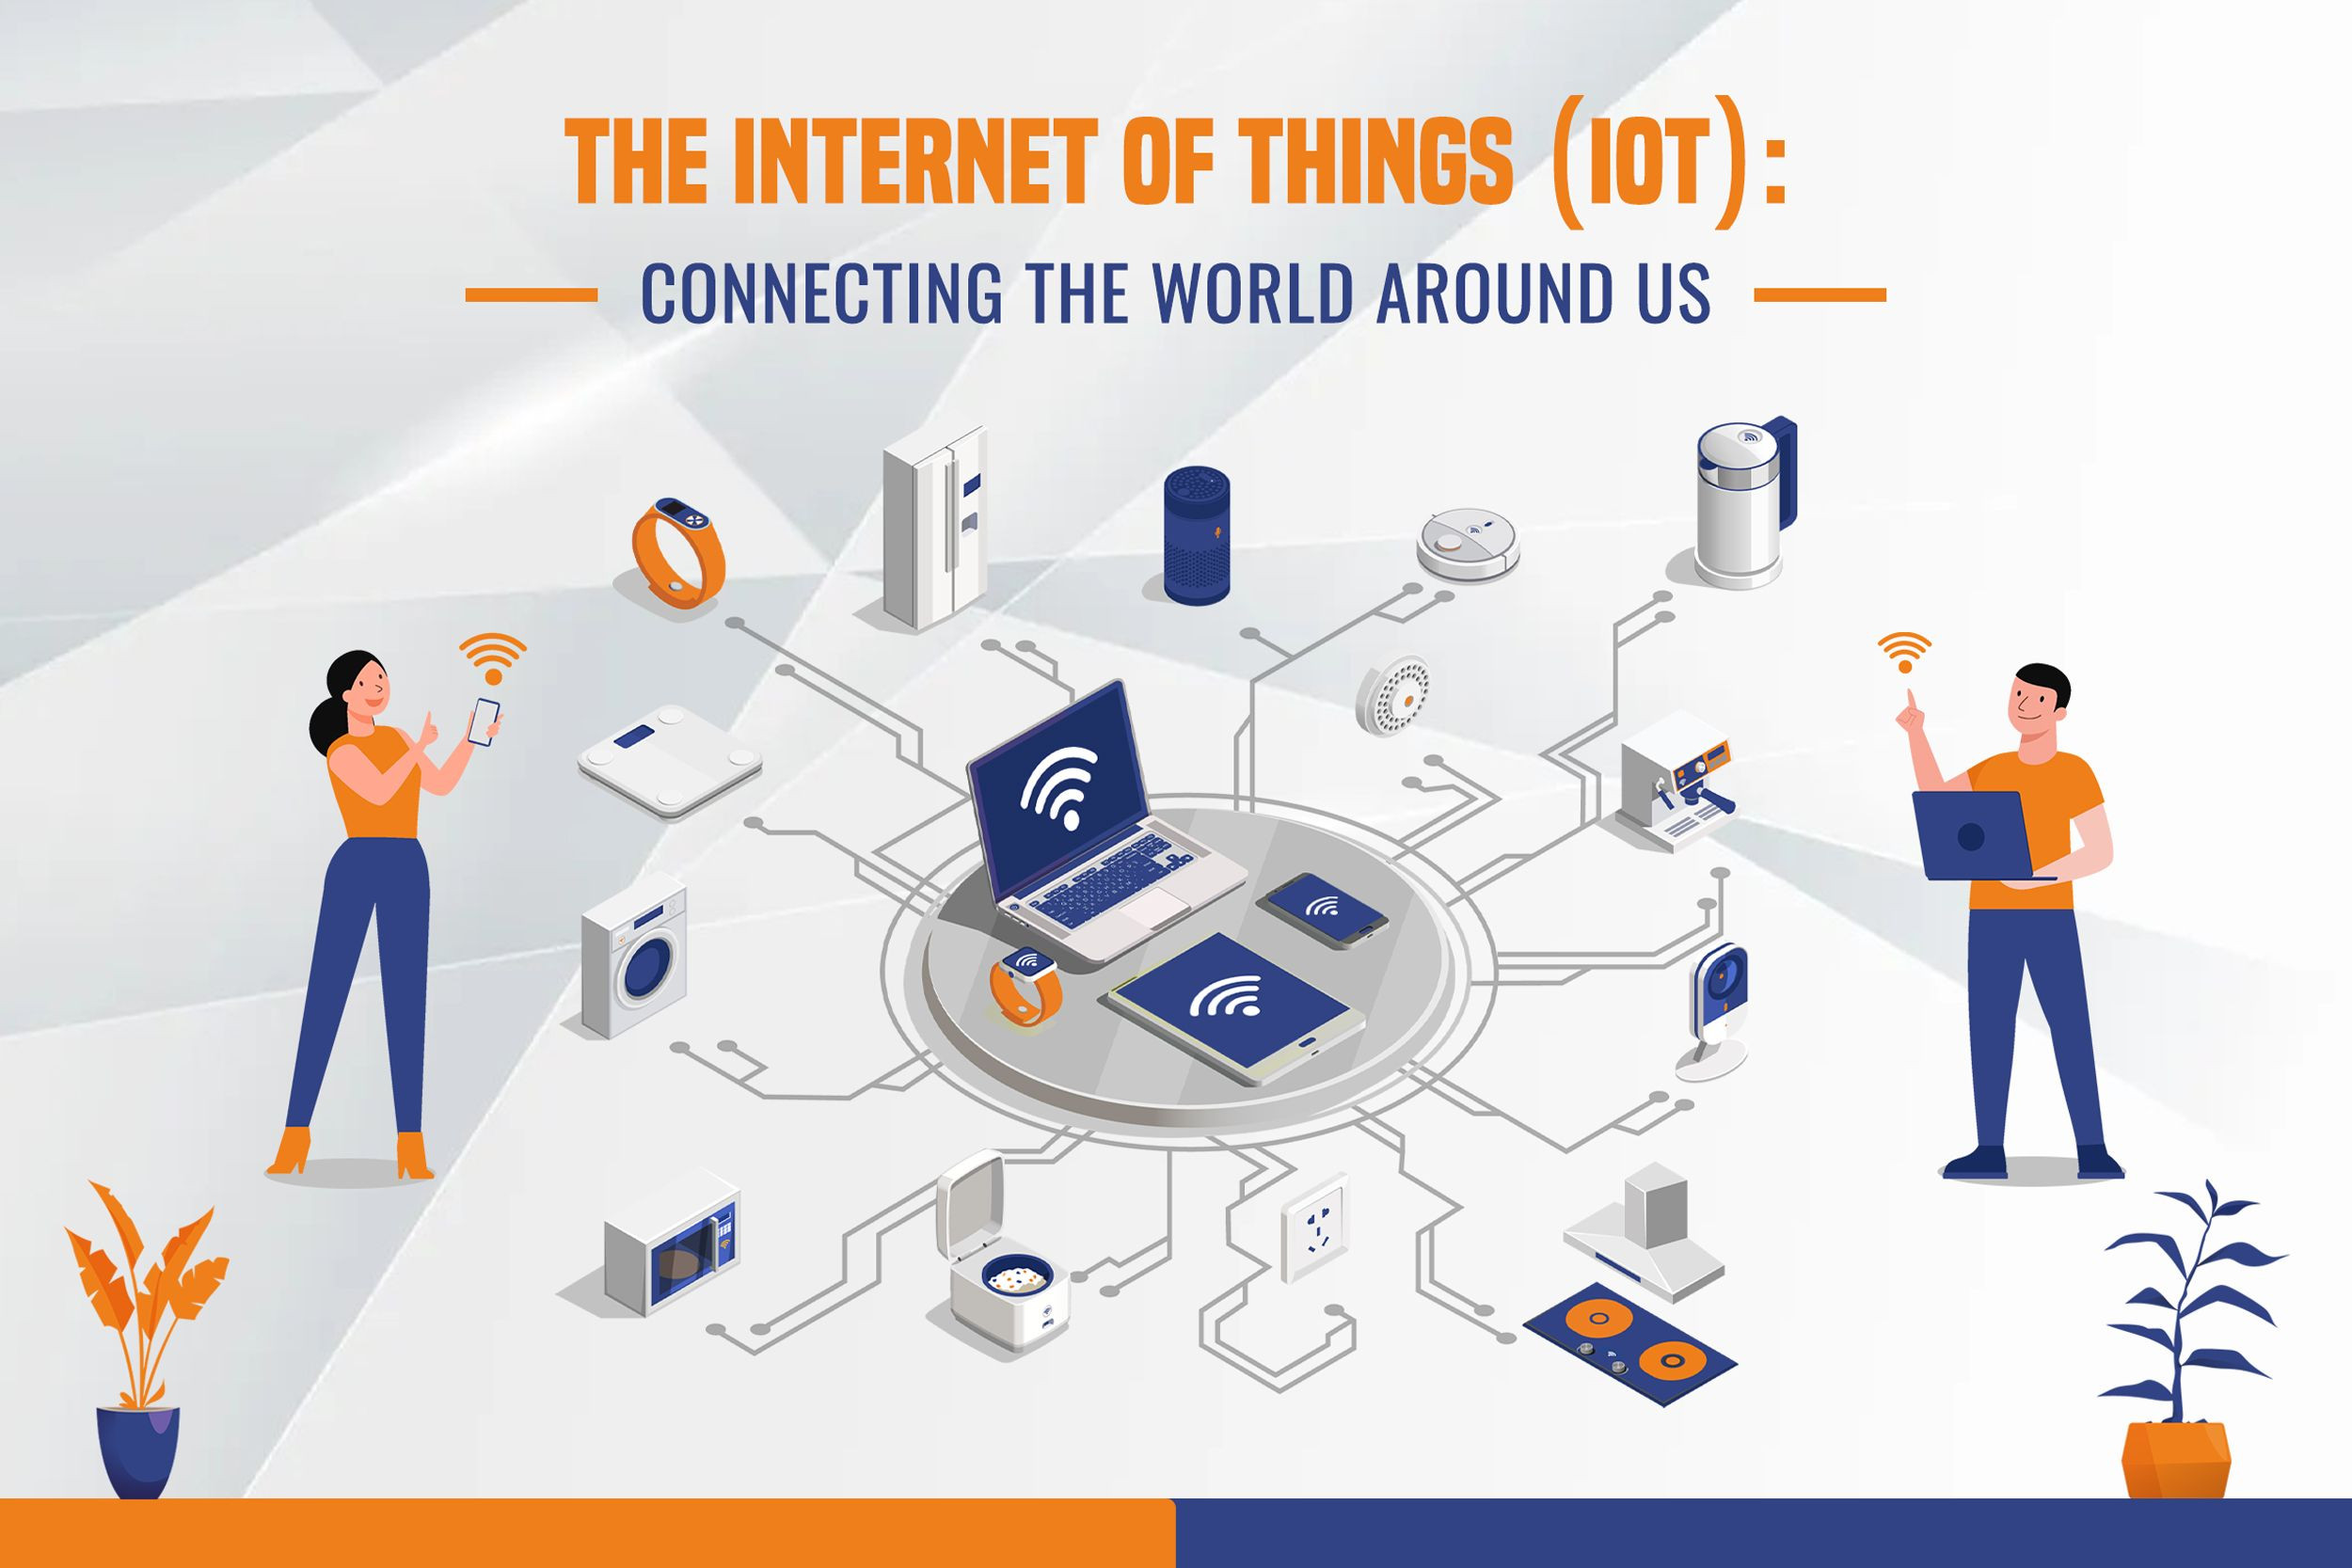 The Internet of Things (IoT) is Making Life Better on Earth